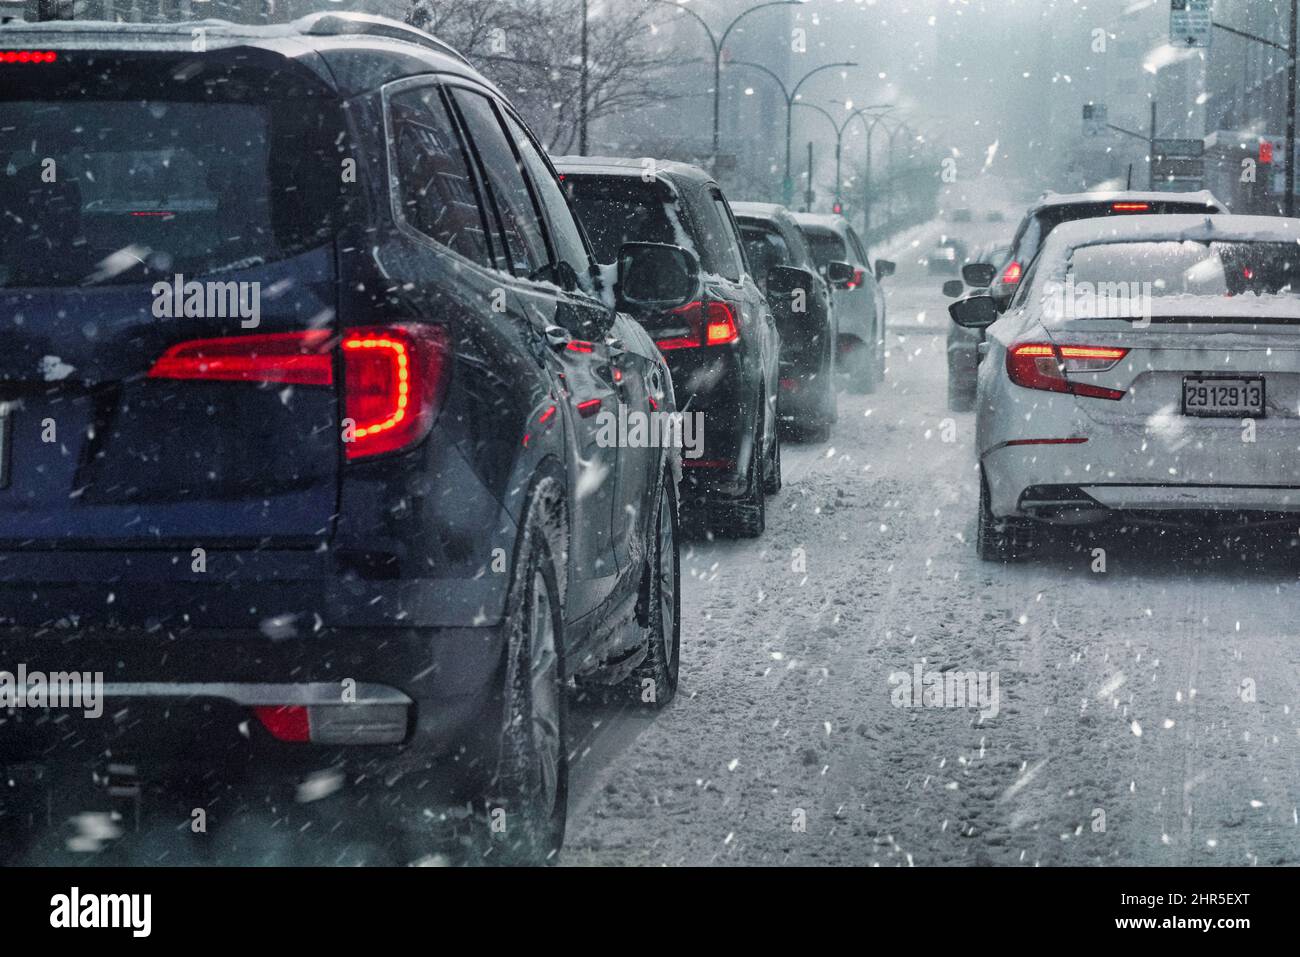 Car and traffic in a snowstorm. Stock Photo